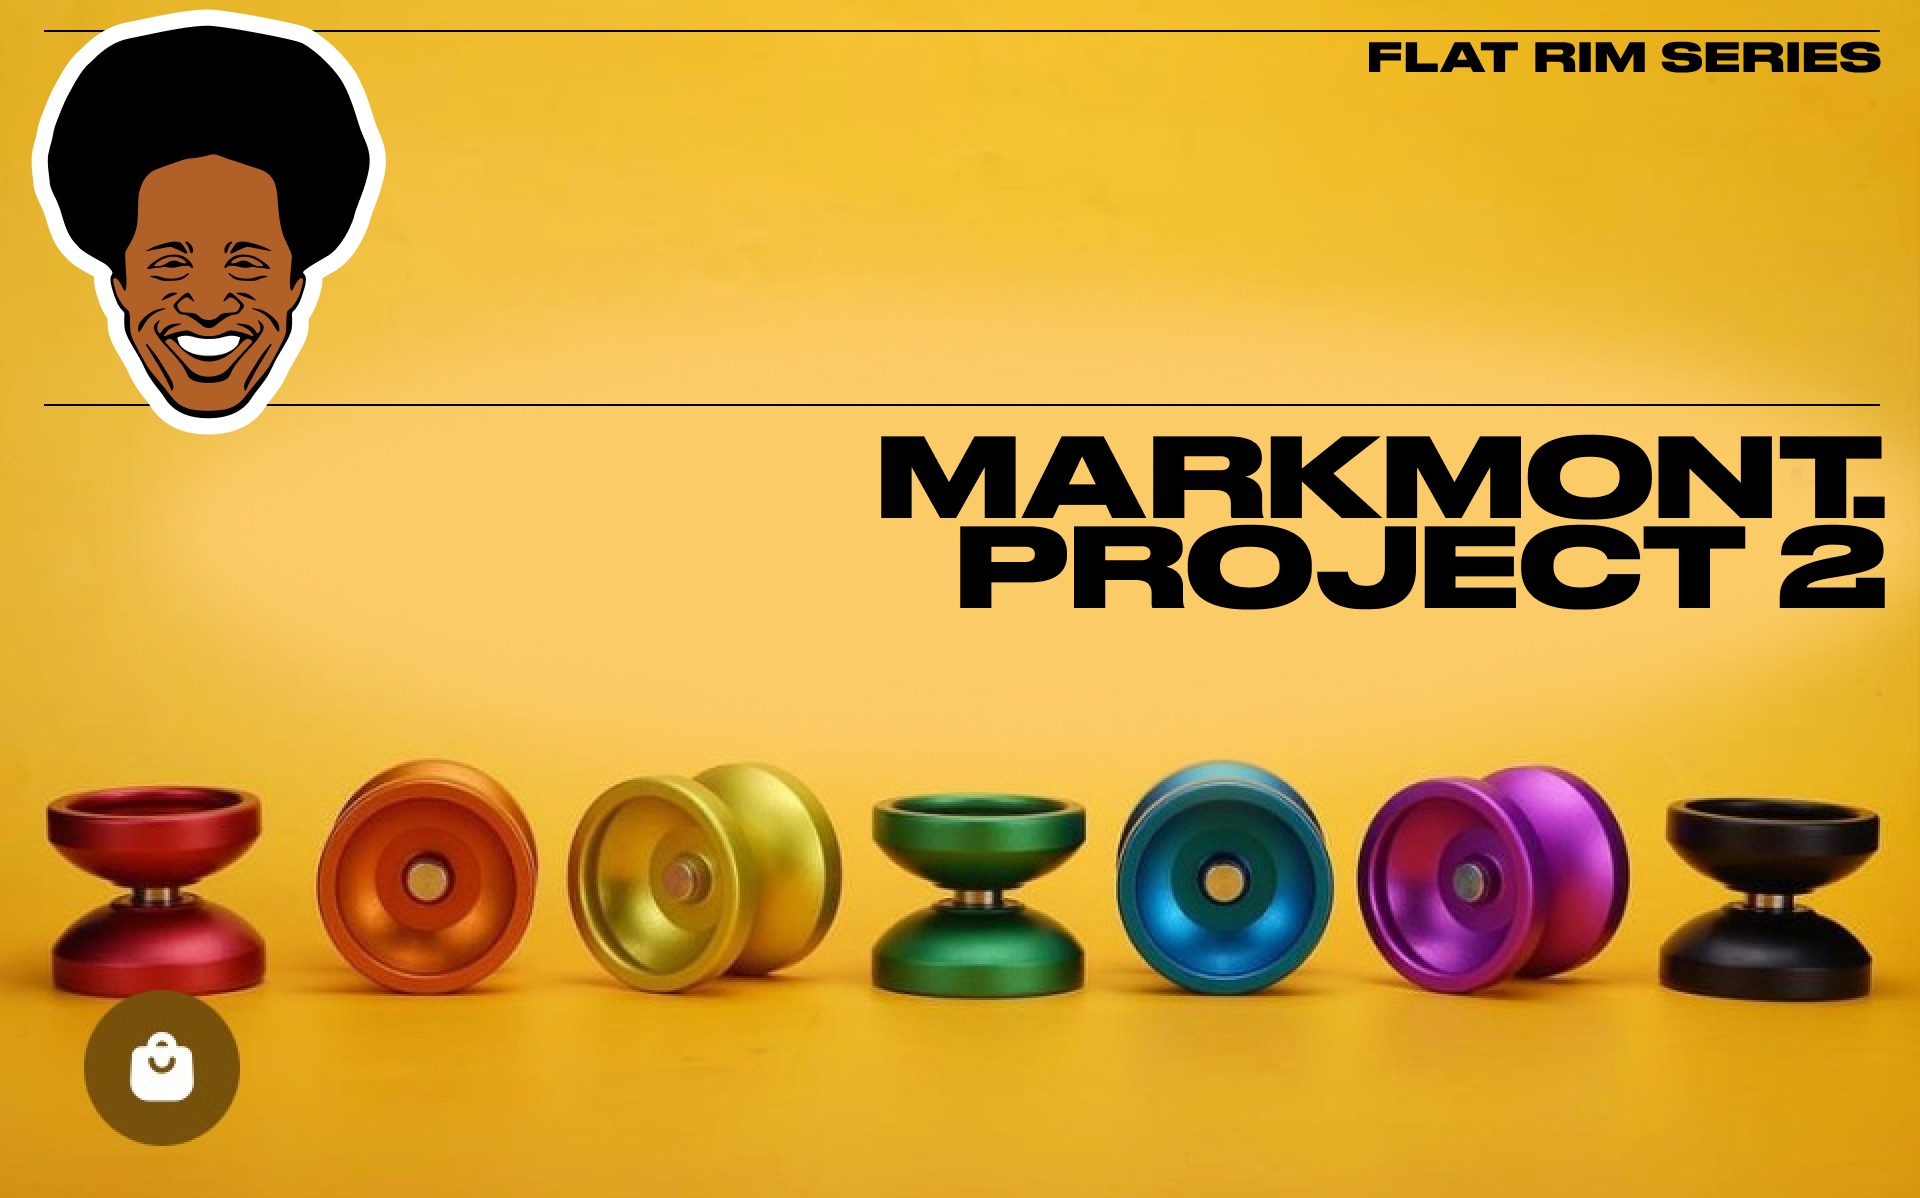 Project 2 by MarkMont.